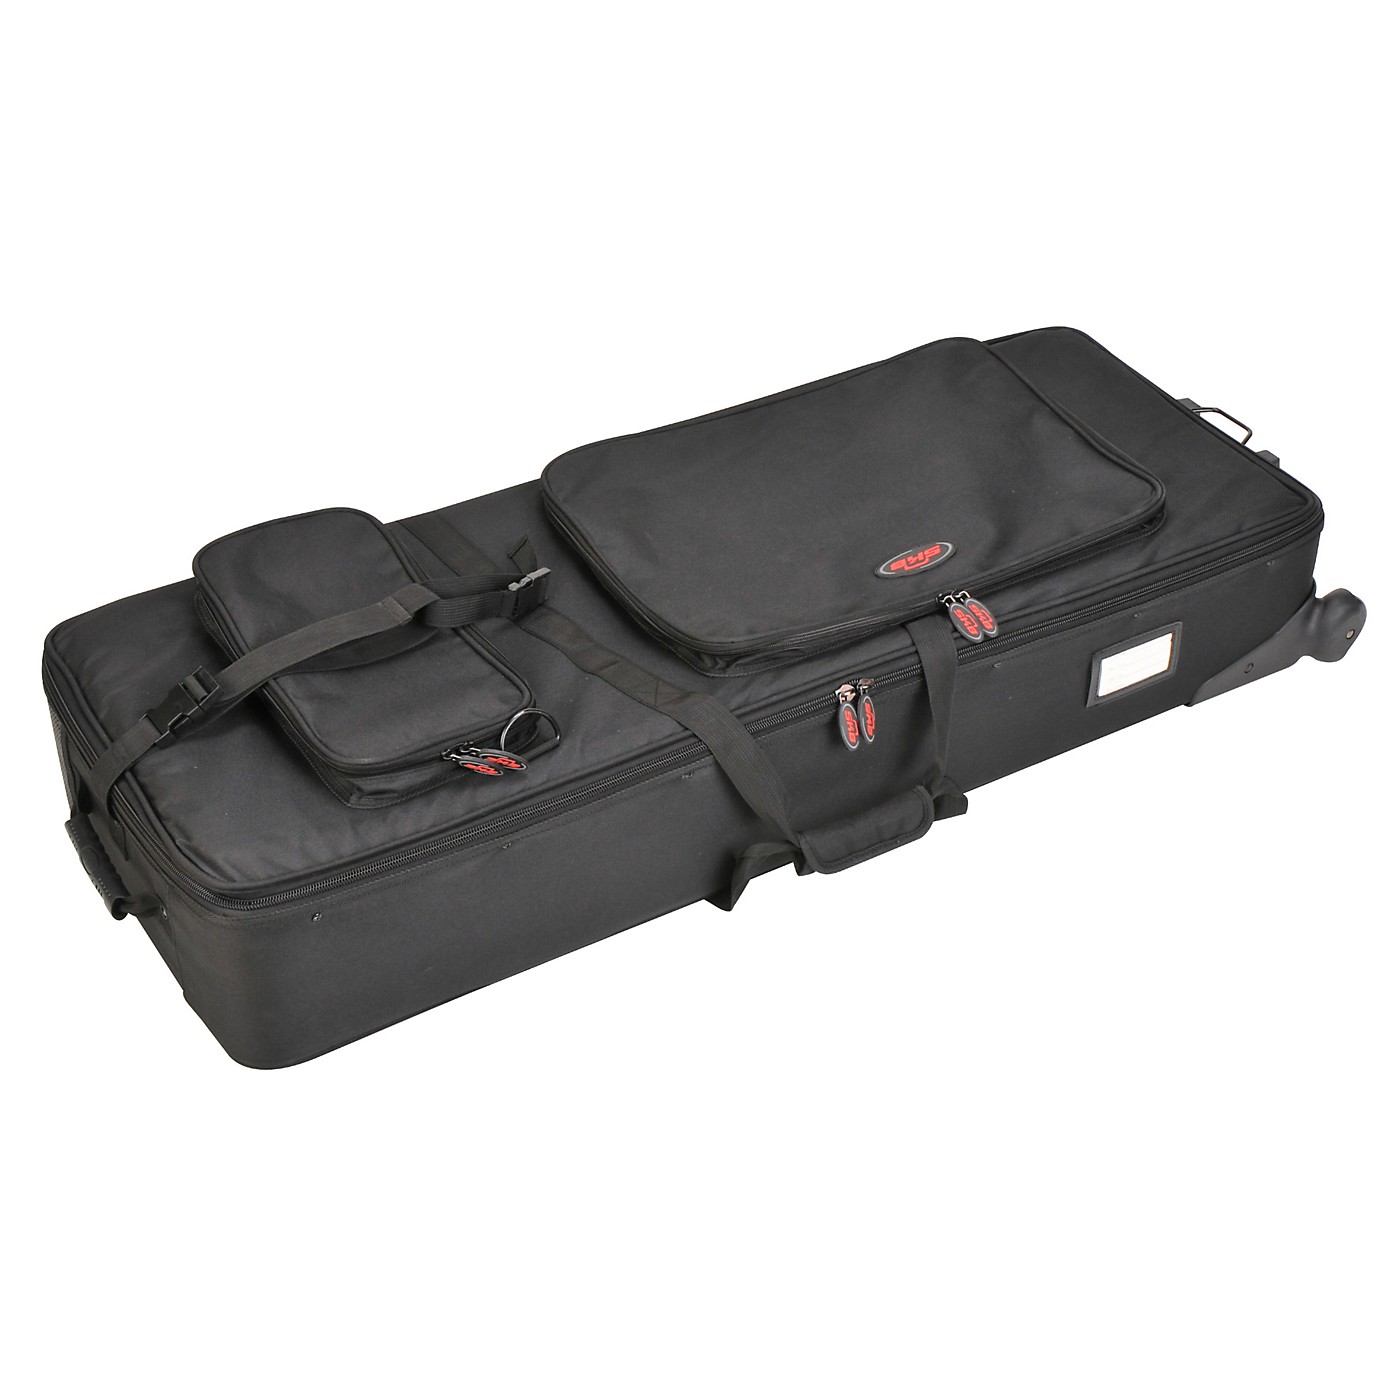 SKB Soft Case for 61-Note Keyboards thumbnail